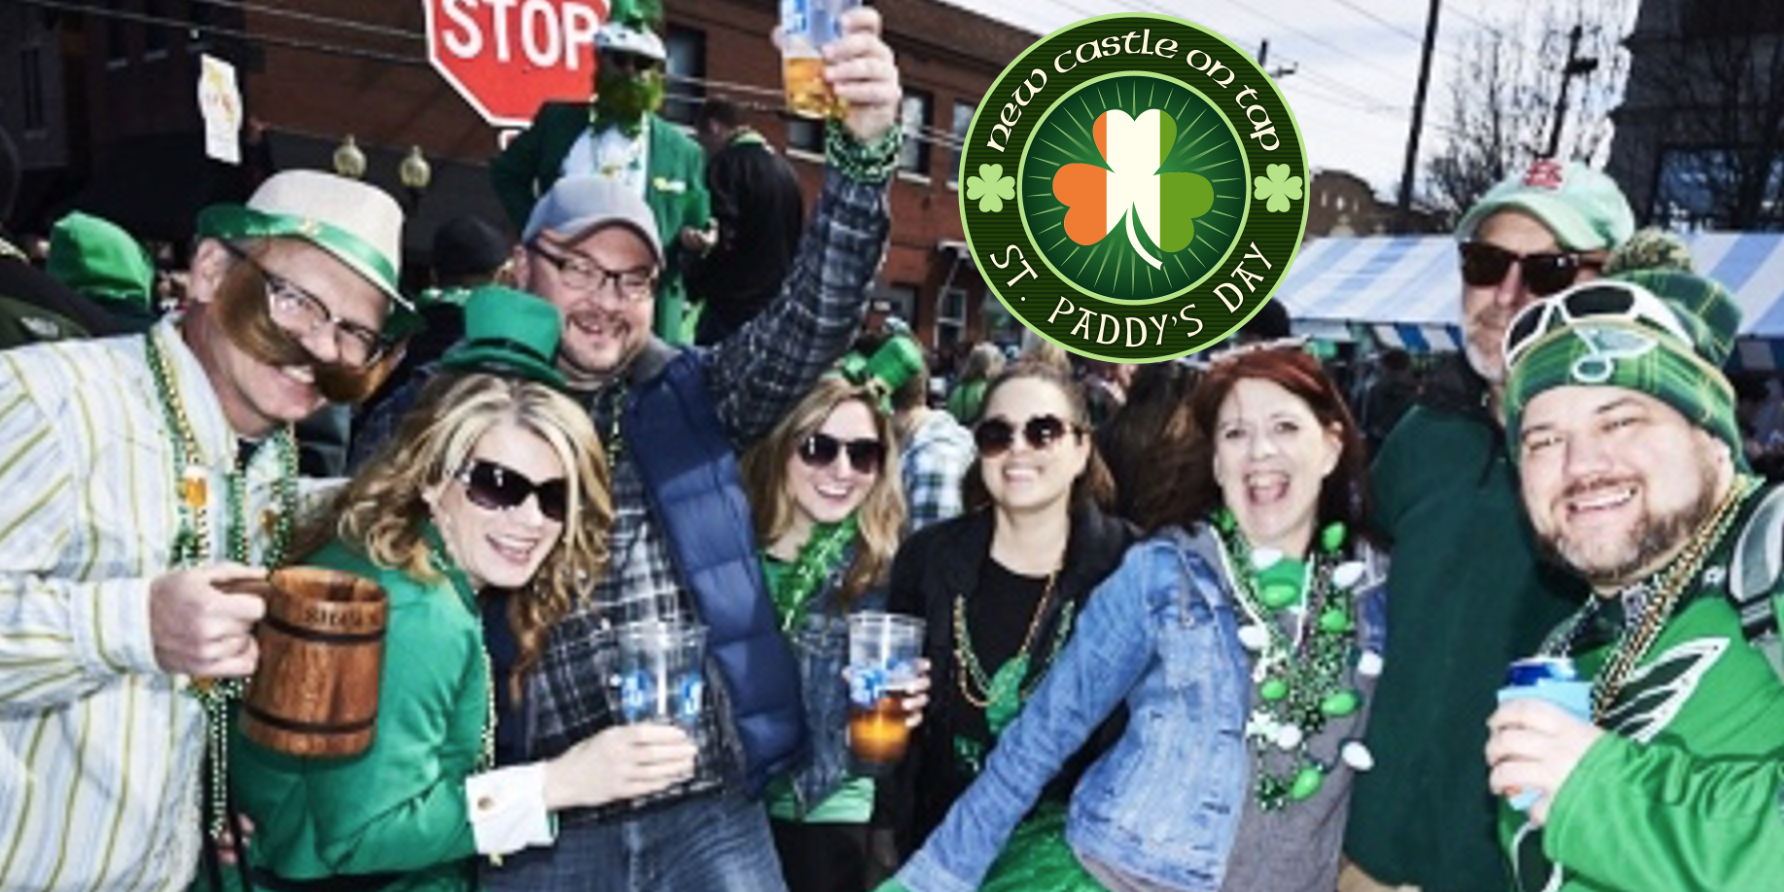 New Castle On Tap - St. Paddy's Day promotional image